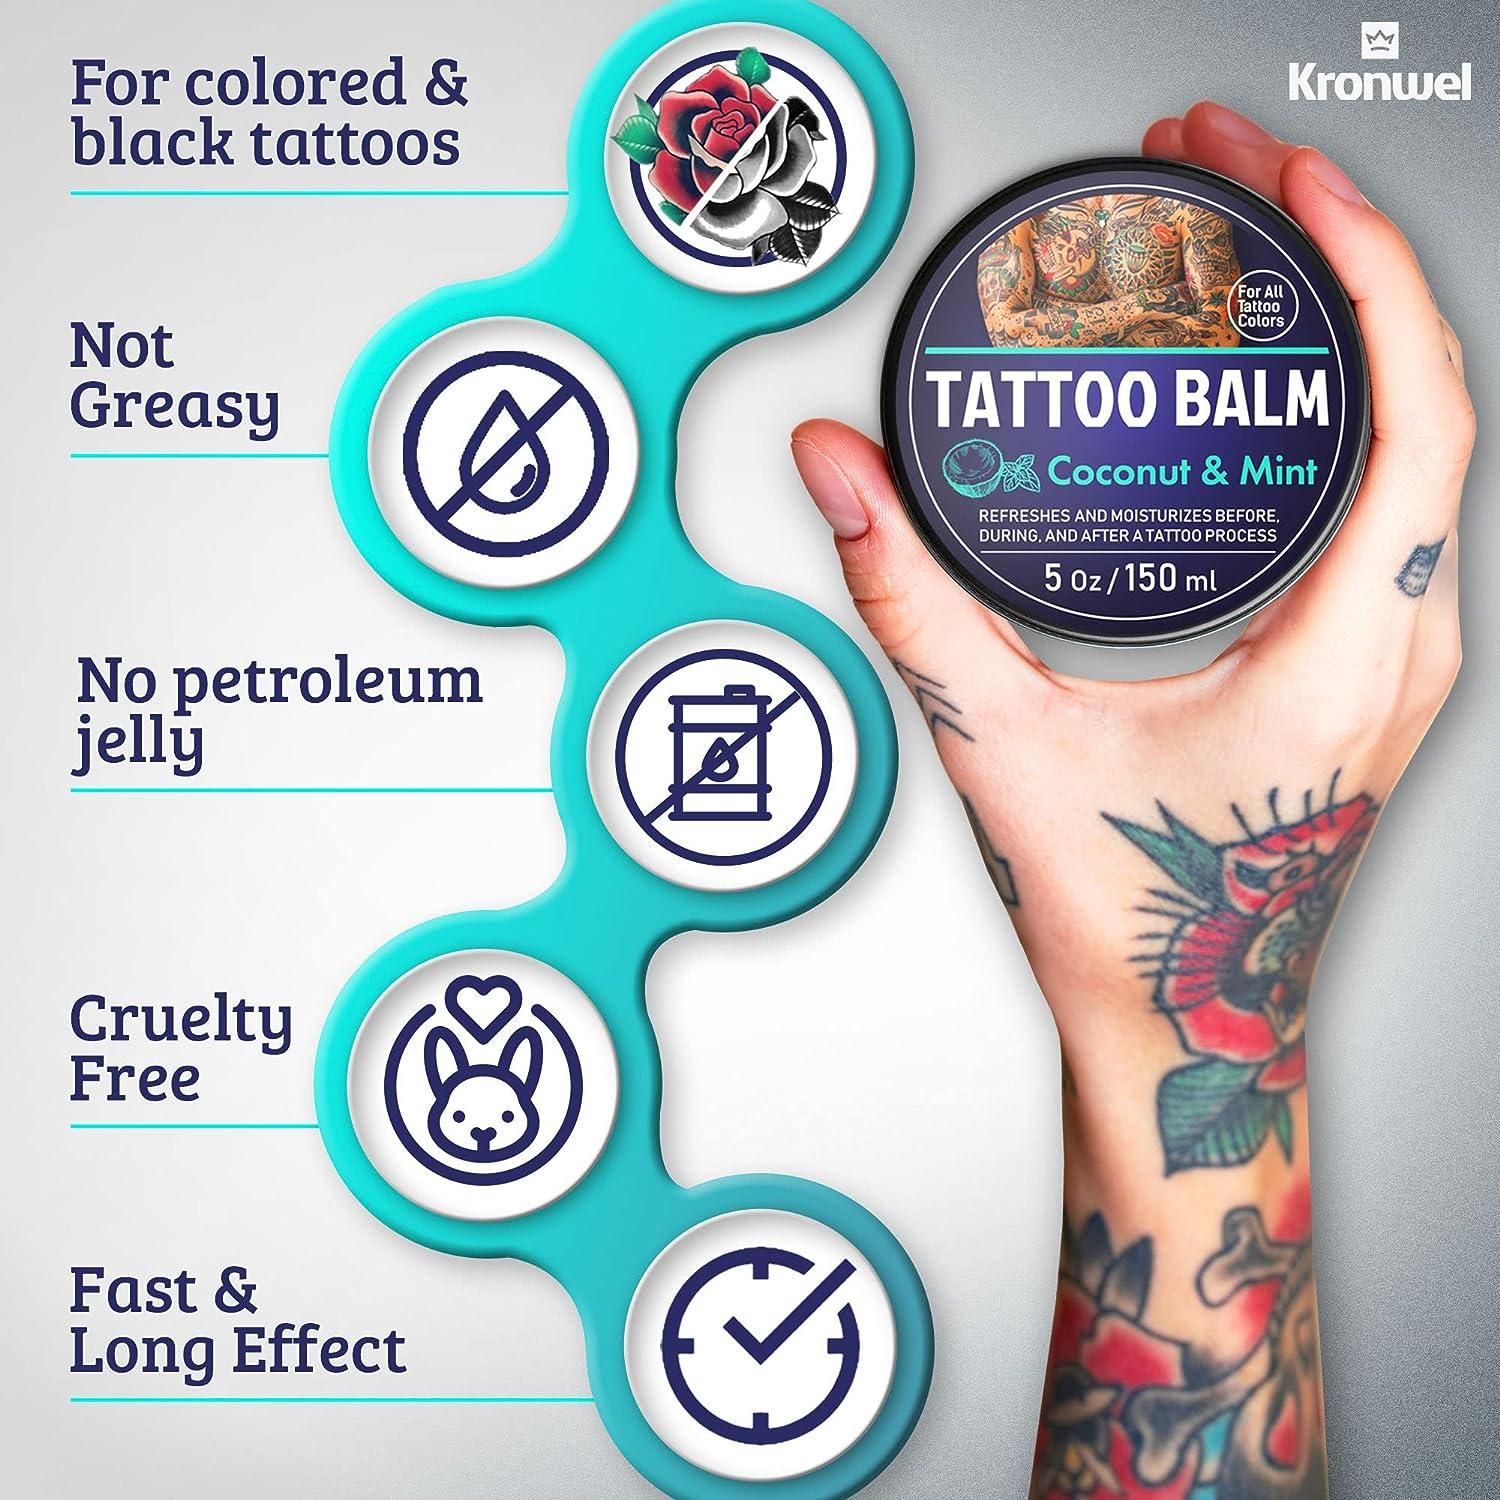 How to Care for a New Tattoo - A Beginner's Guide